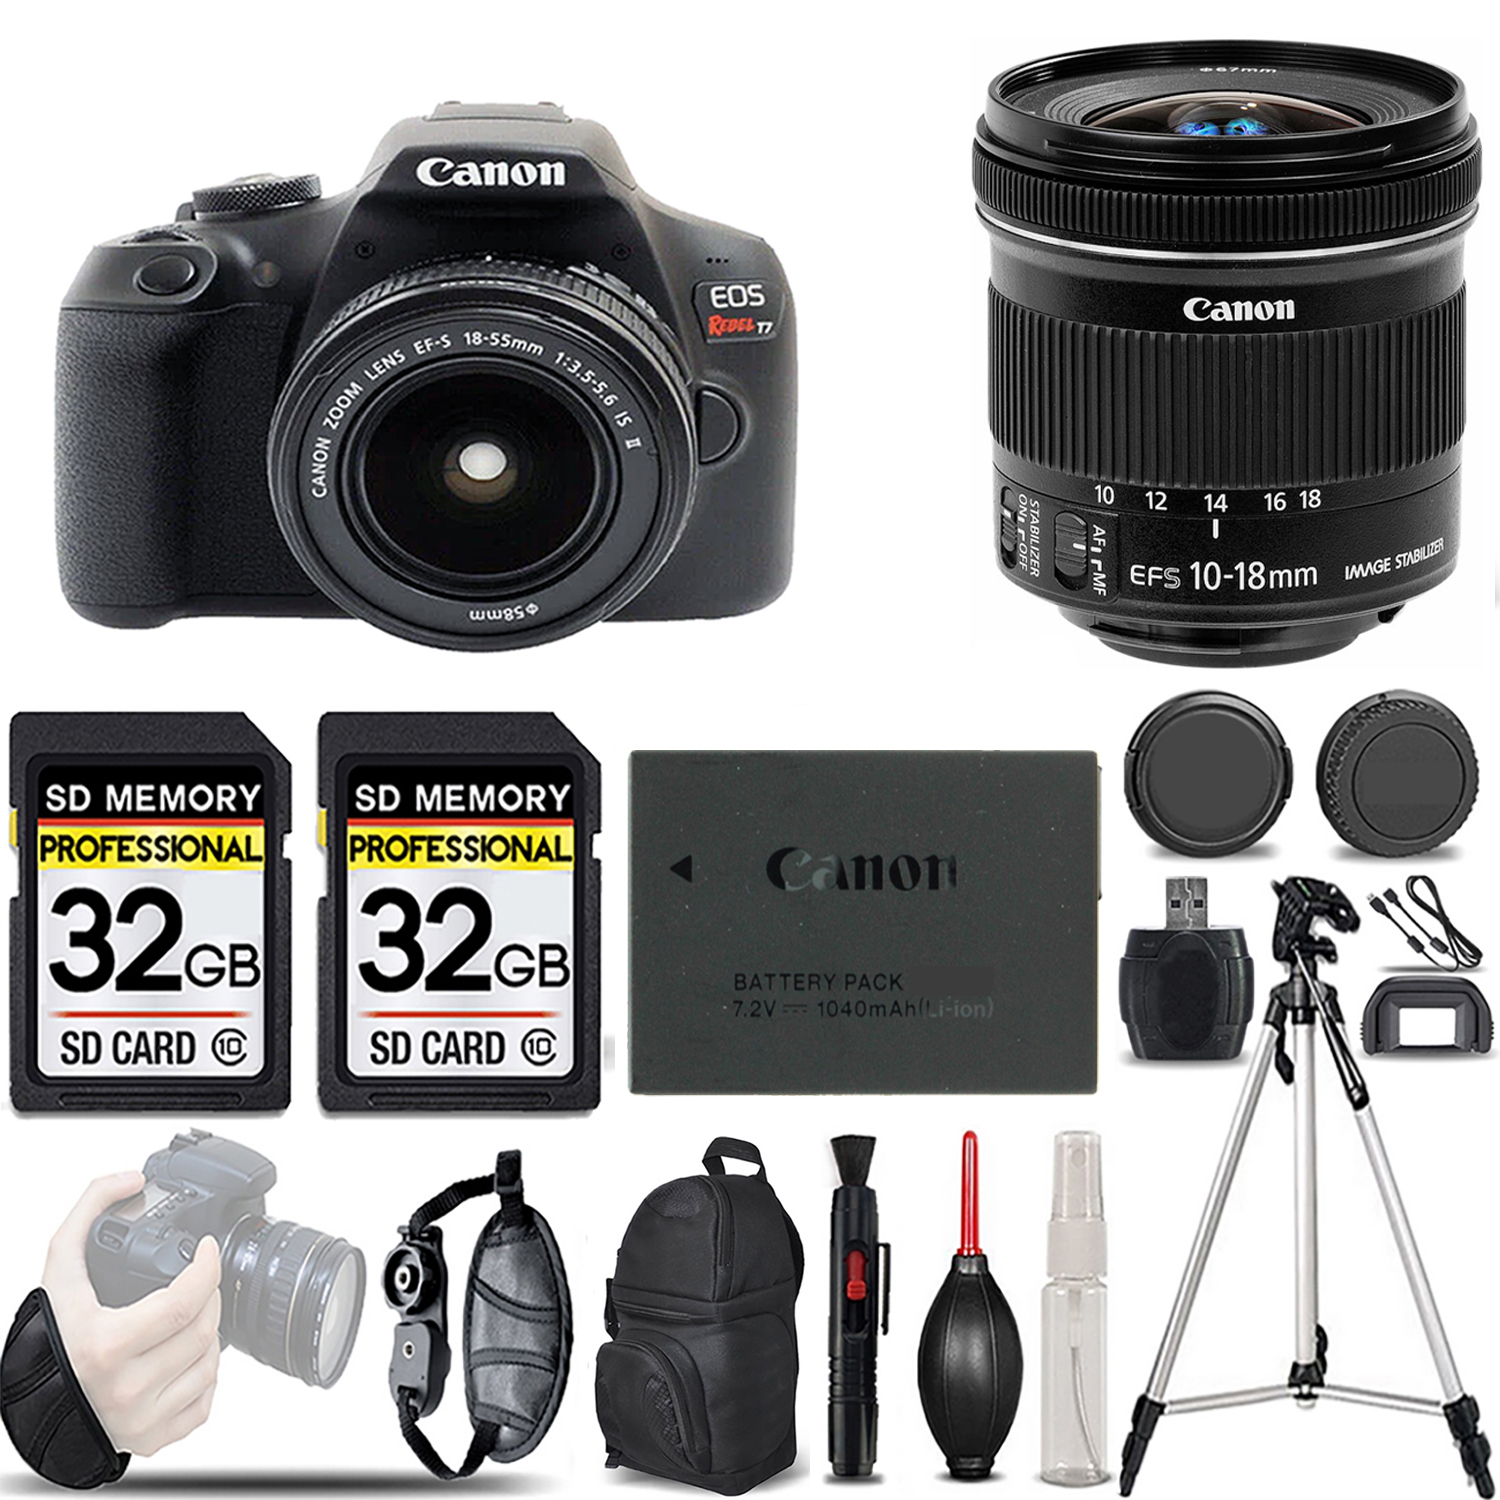 EOS Rebel T7 with 18-55mm Lens + 10-18mm f/4.5-5.6 IS STM Lens - LOADED KIT *FREE SHIPPING*